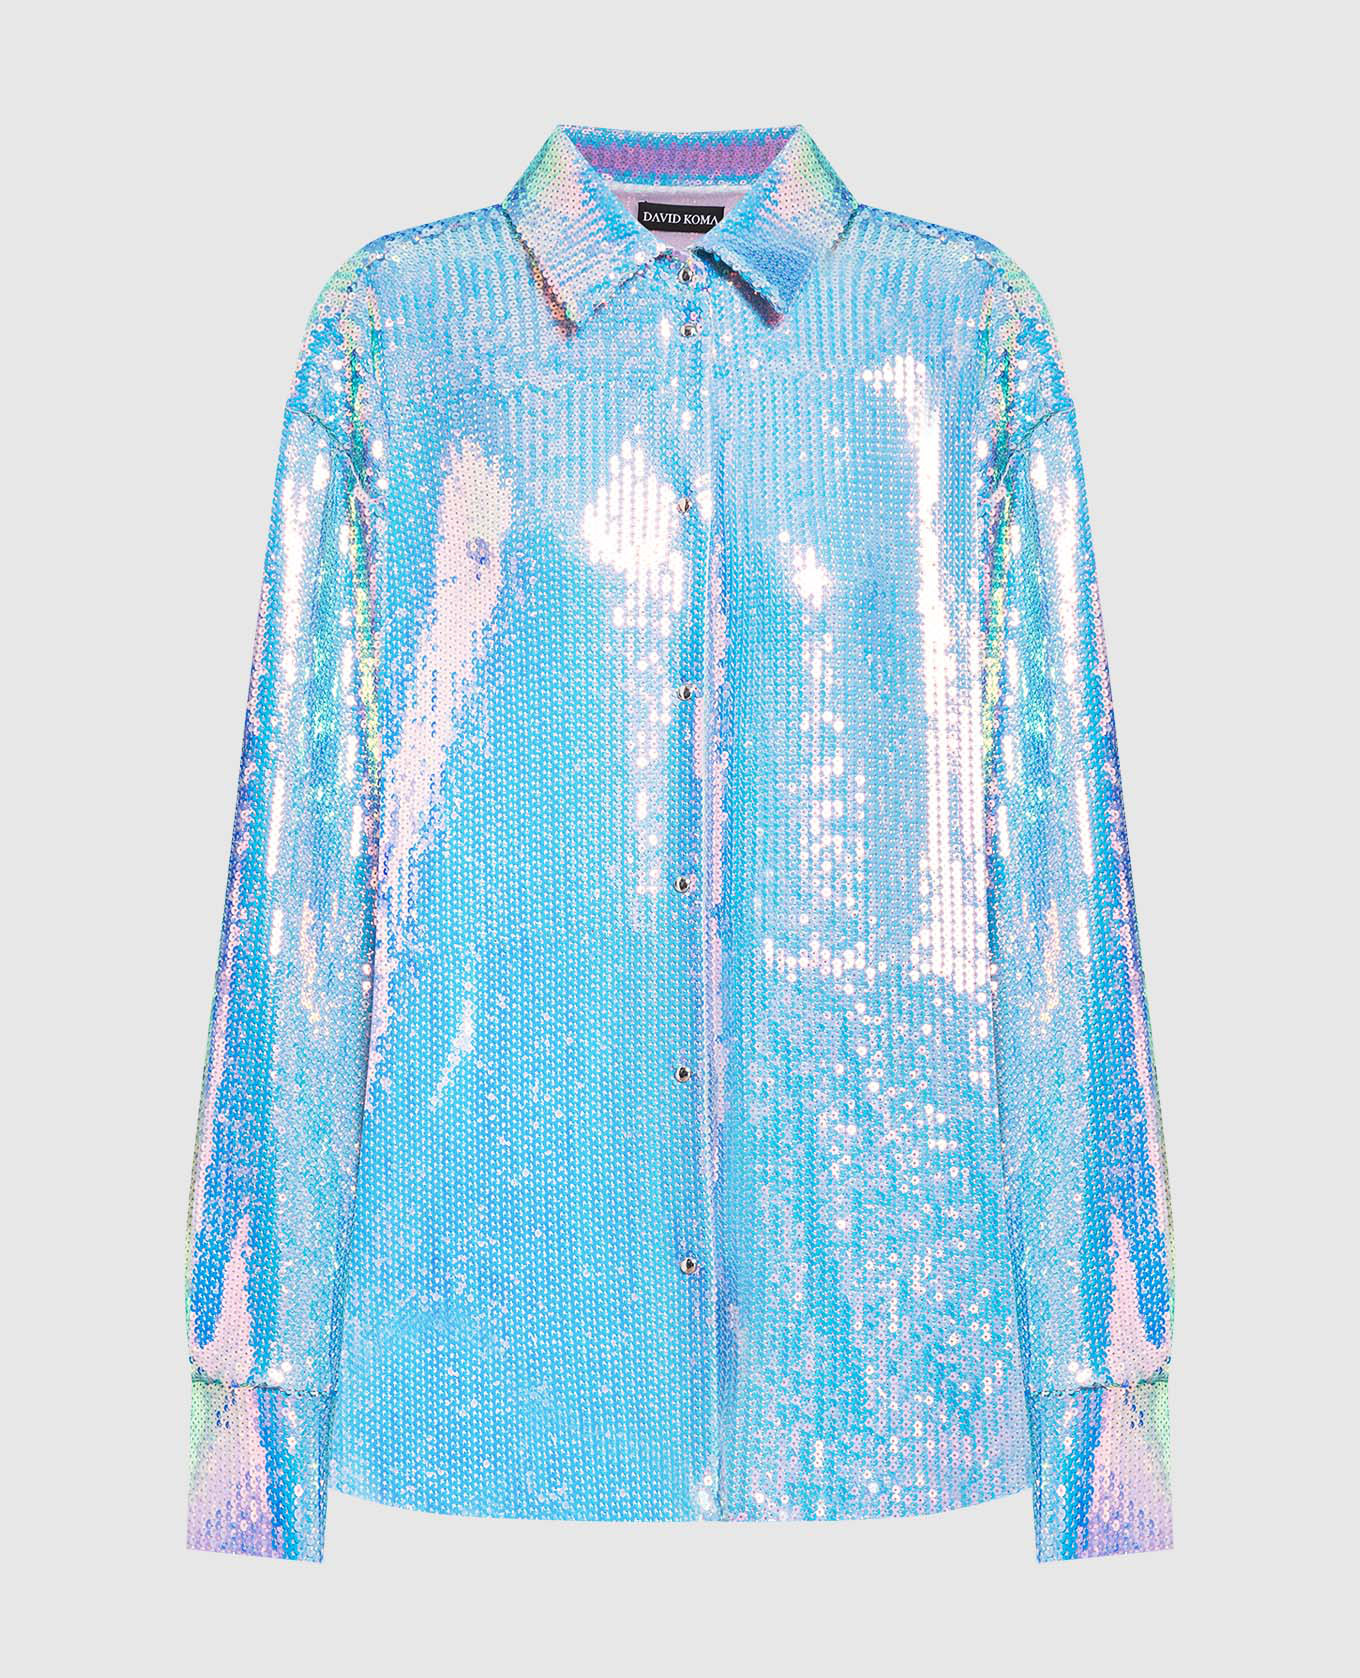 Blue shirt with sequins